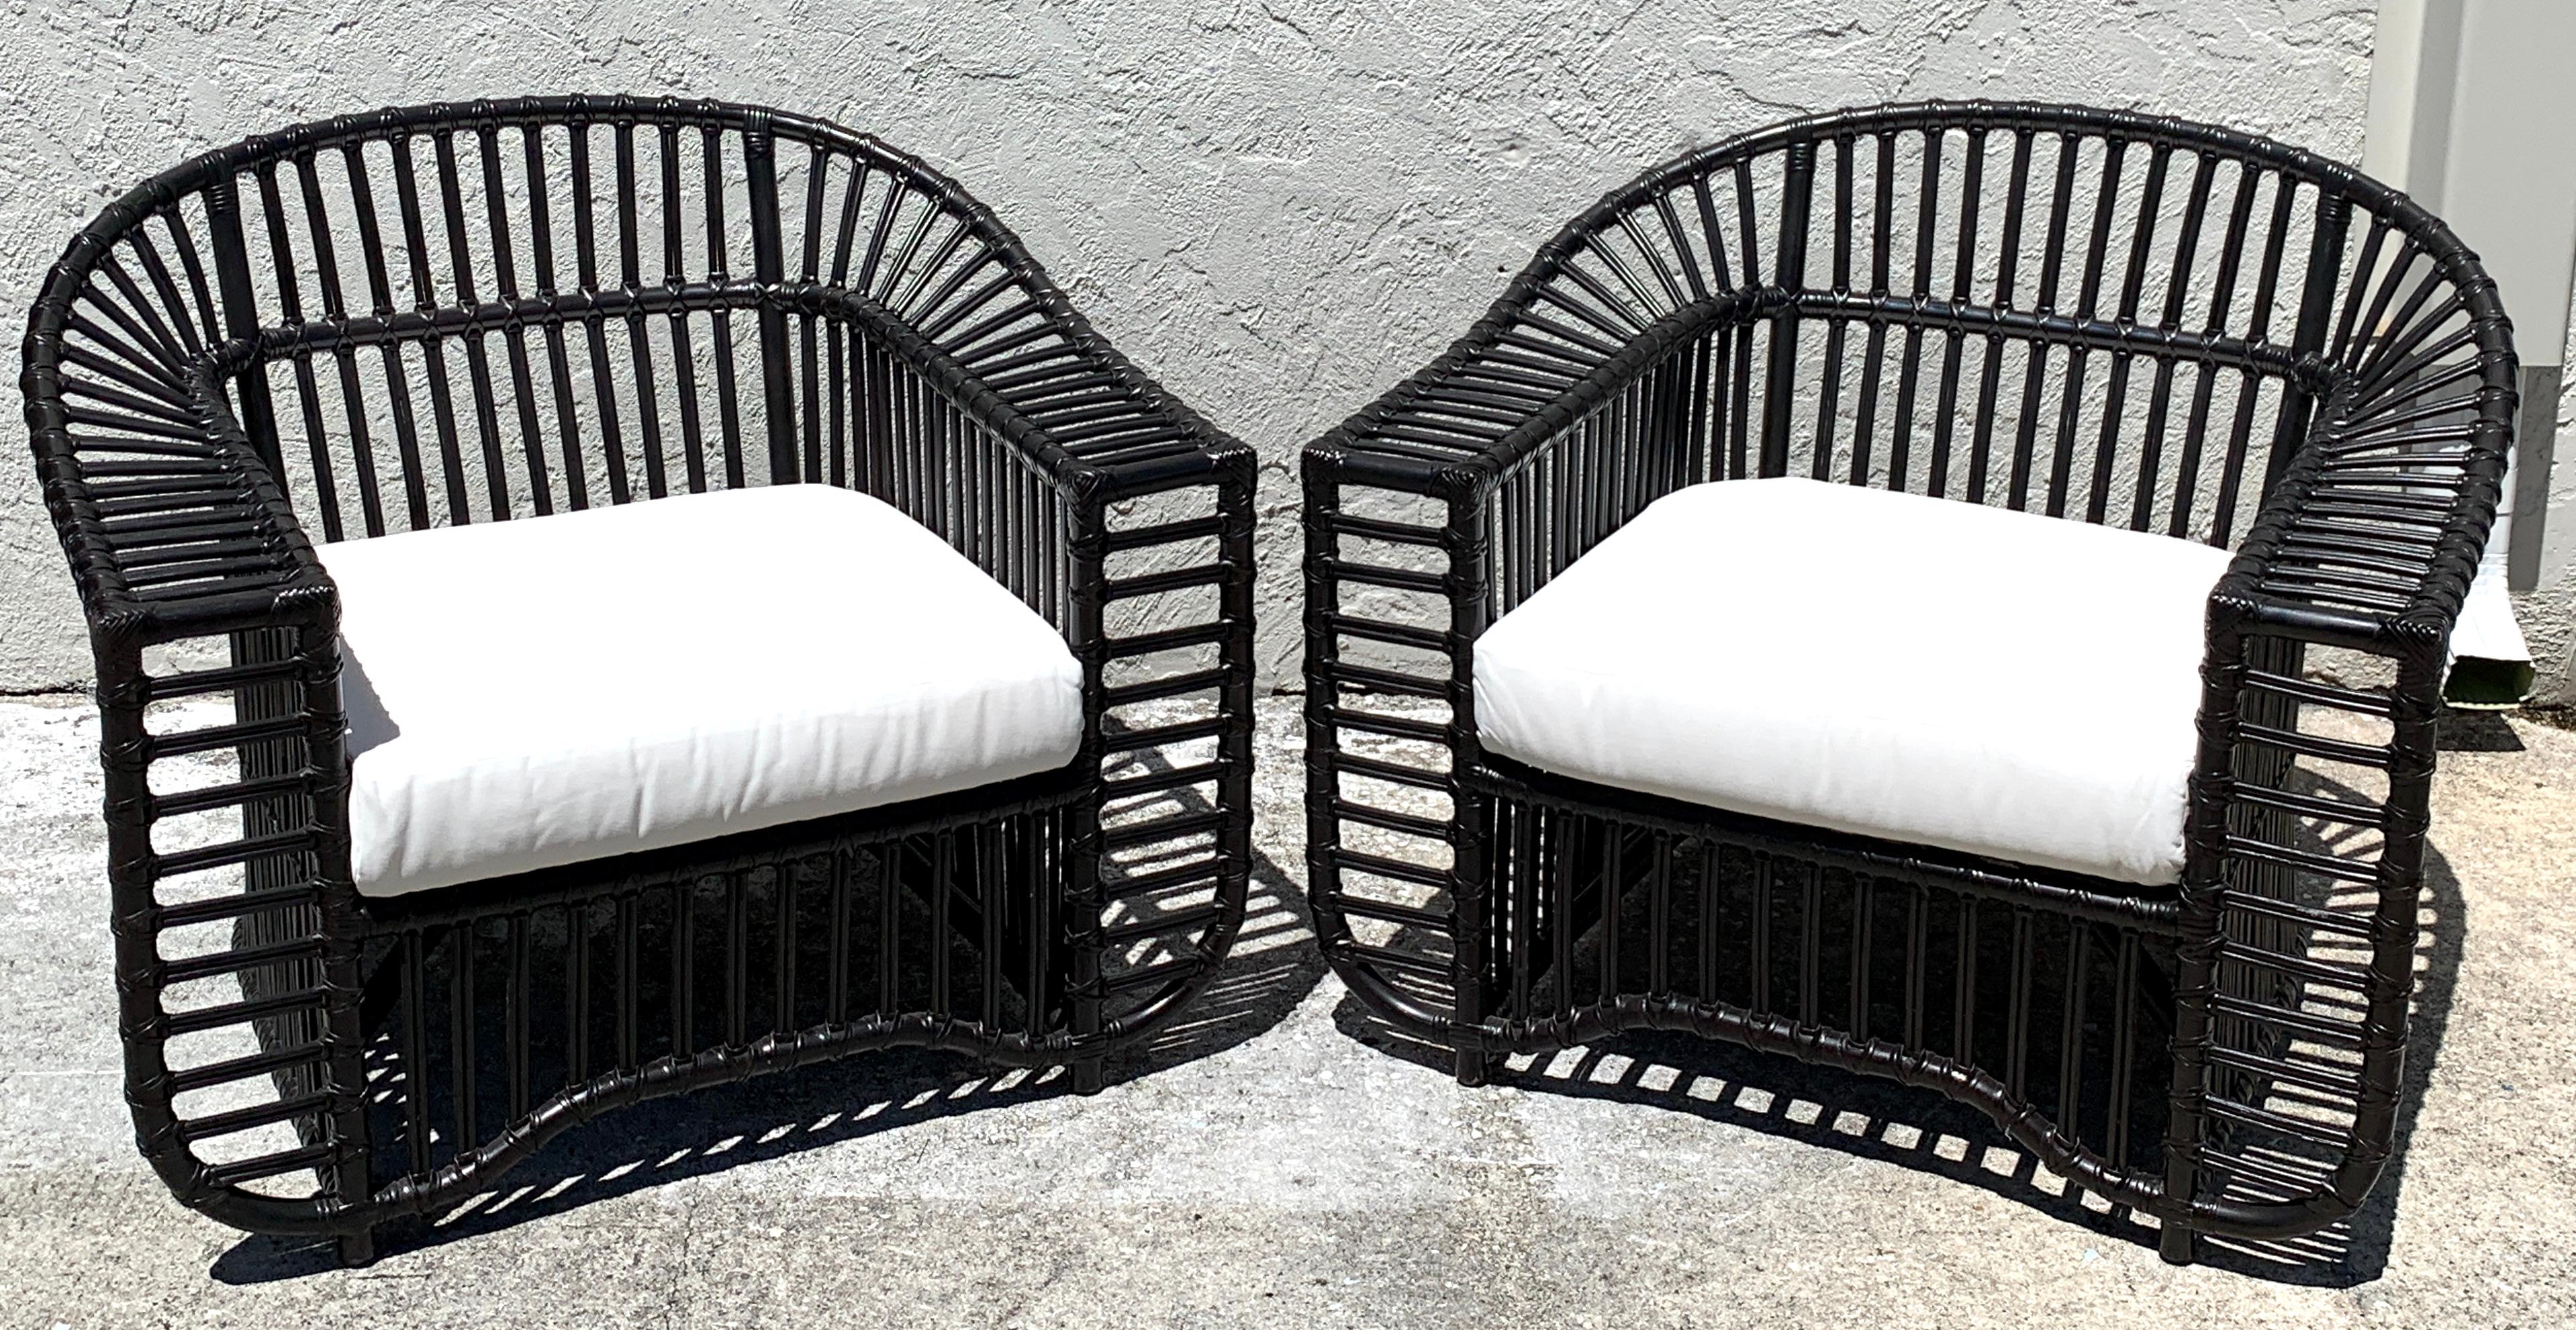 Pair of midcentury ebonized rattan club chairs by Henry Olko, restored
Each one sculptural, beautifully made complete with duck cloth cushions
Each chair measures 32